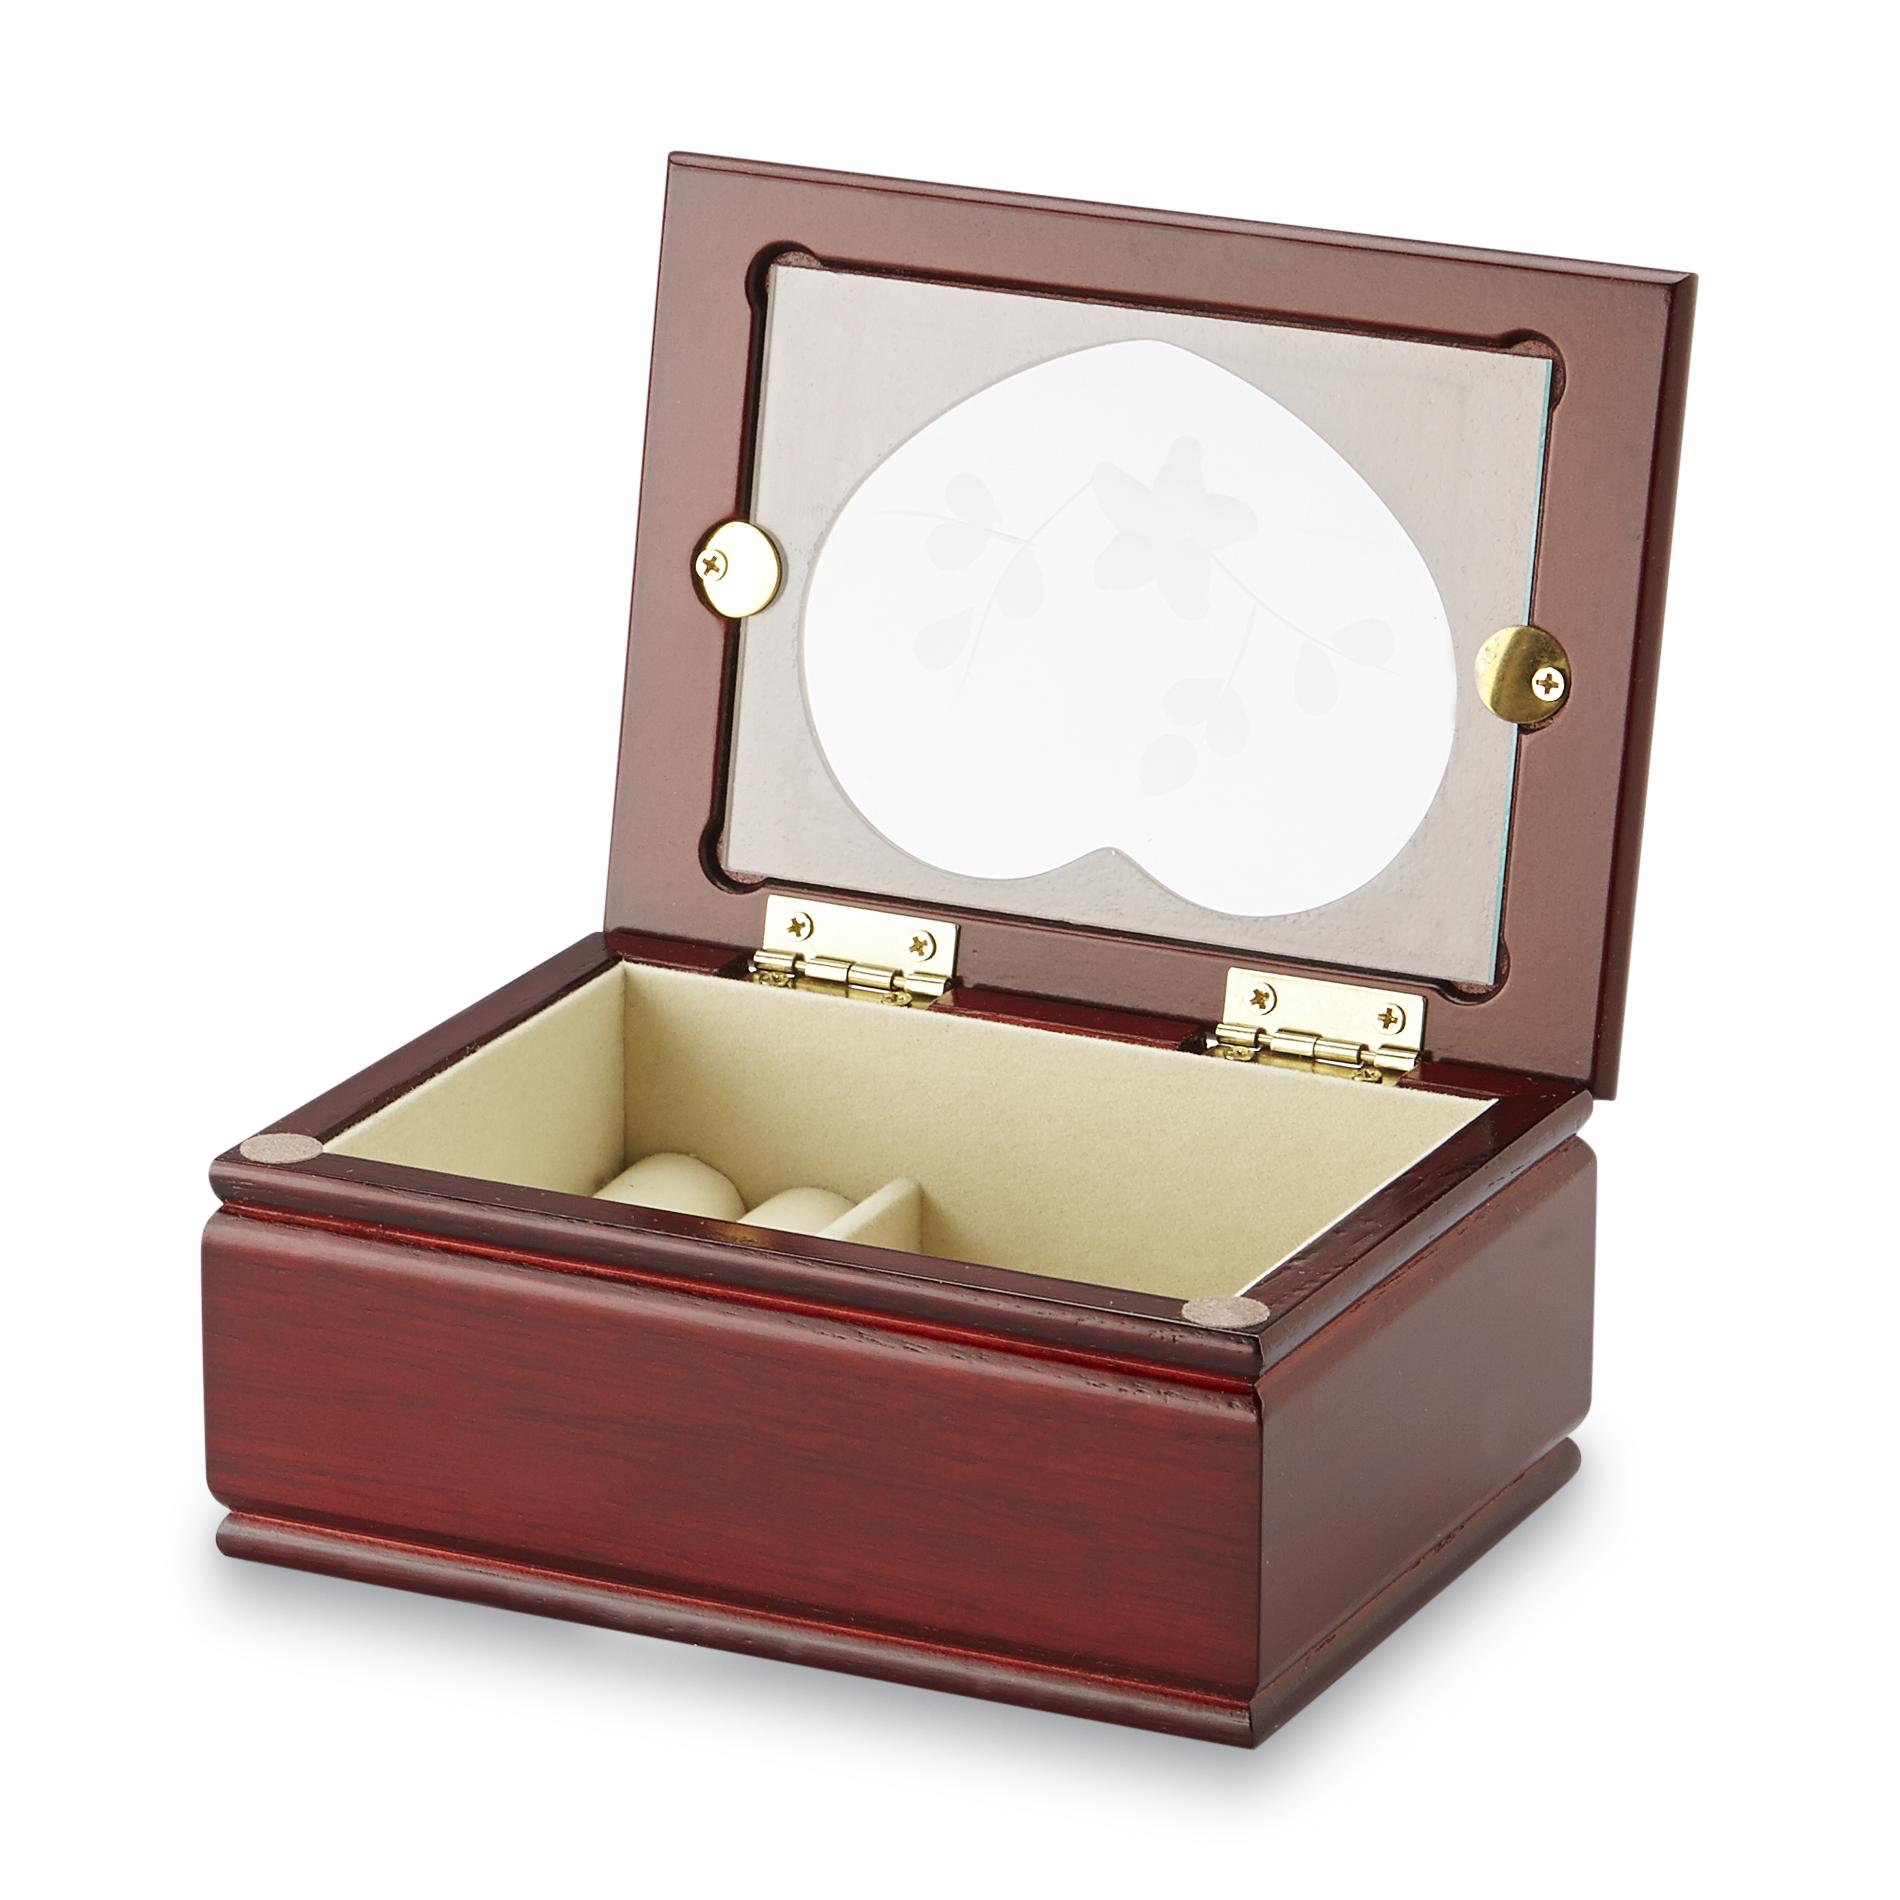 Wooden Jewelry Box With Heart Cutout Only $5.99 + Free Pickup!